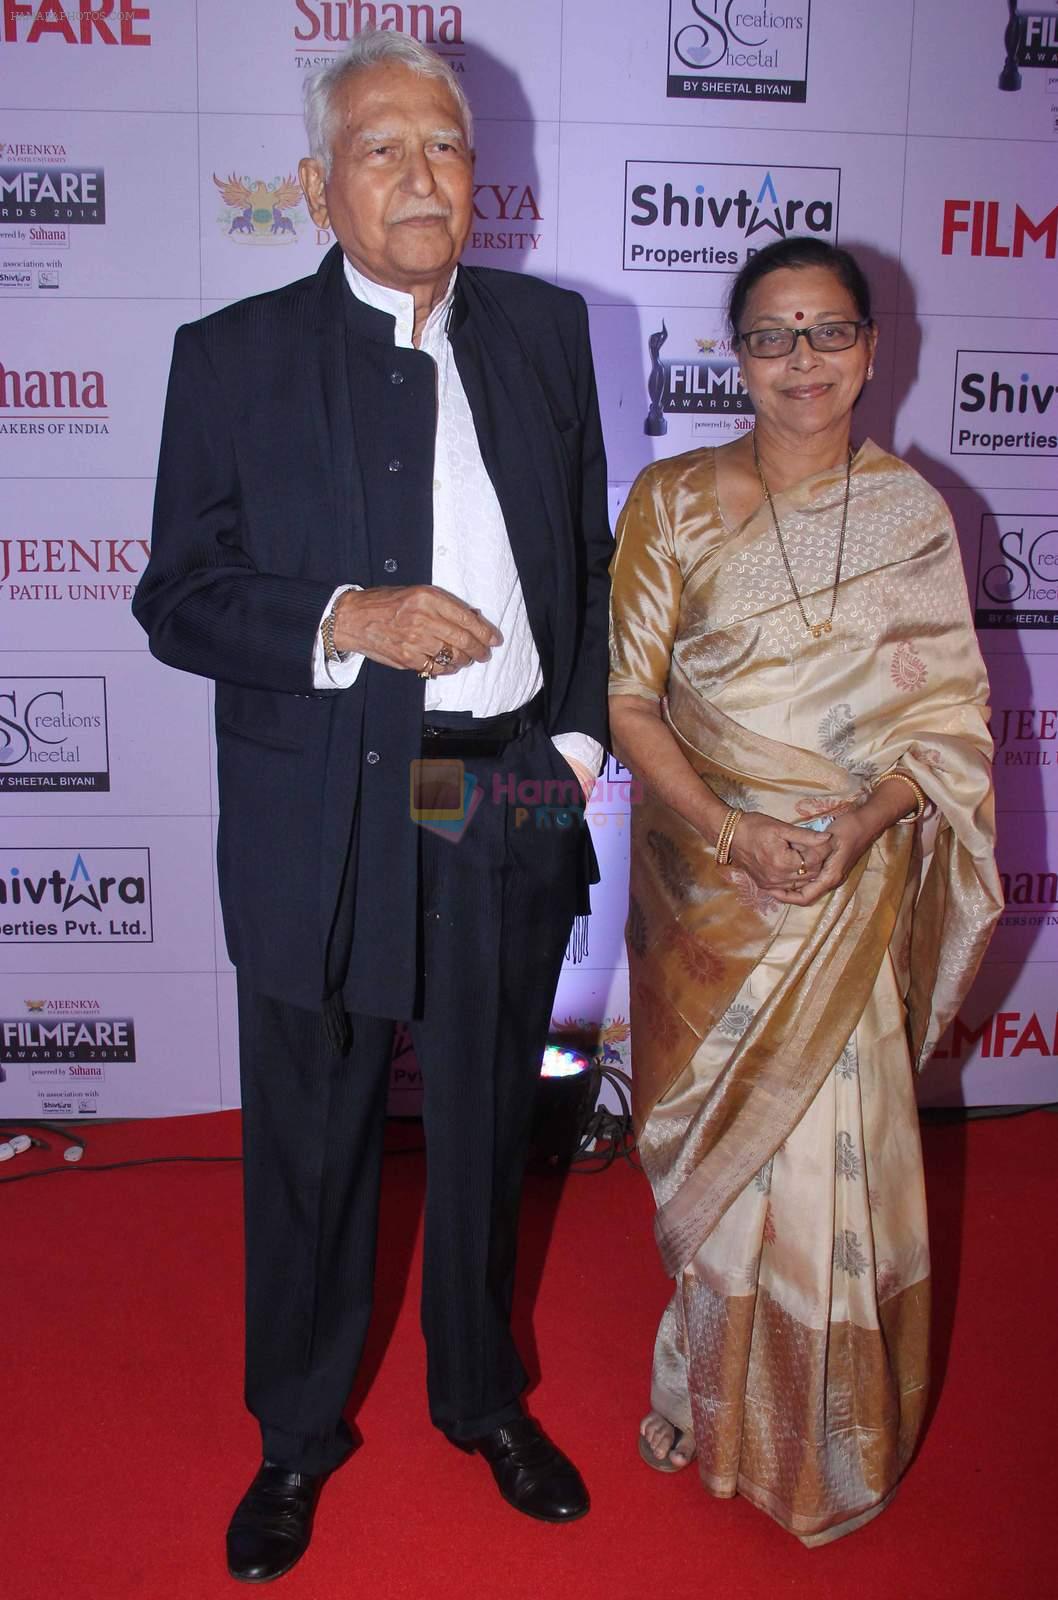 Ramesh Deo with wife Seema Deo at the Red Carpet of _Ajeenkya DY Patil University Filmfare Awards